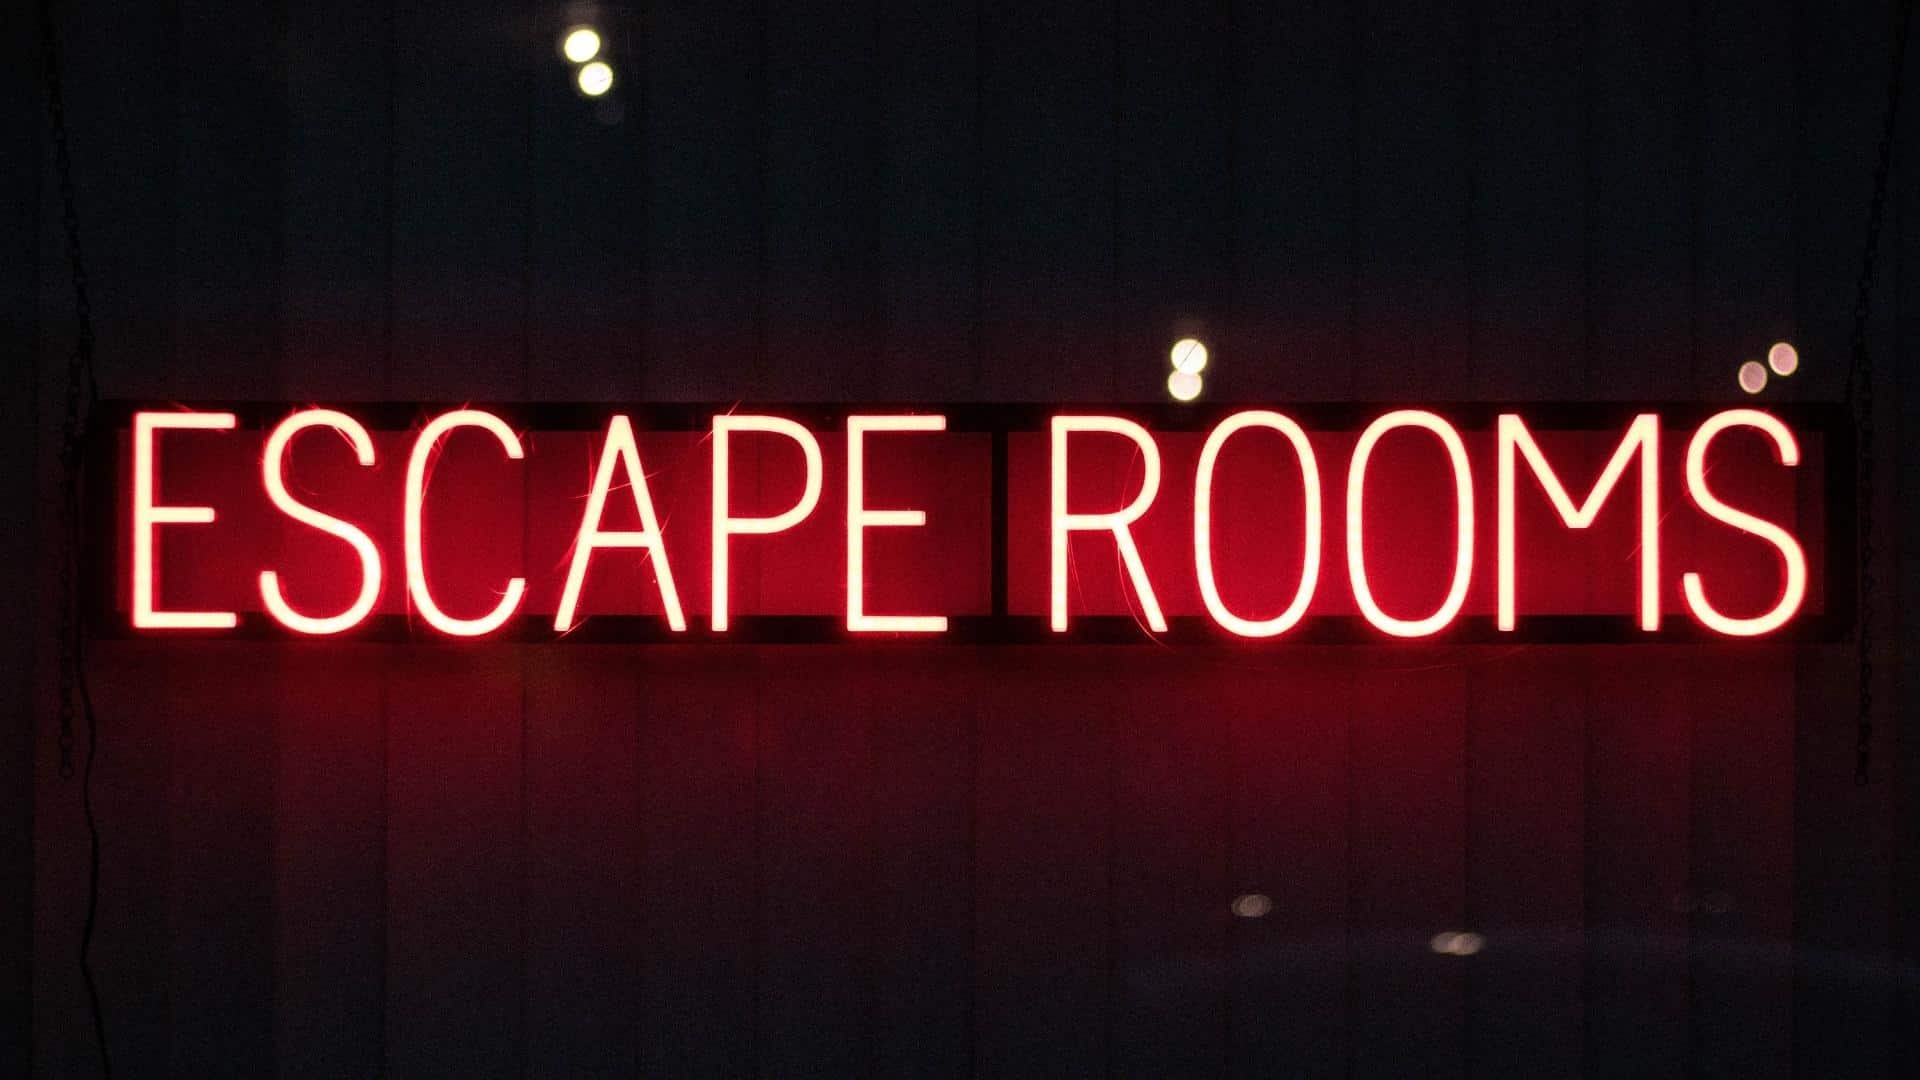 Things to Do in Orlando - Escape Rooms